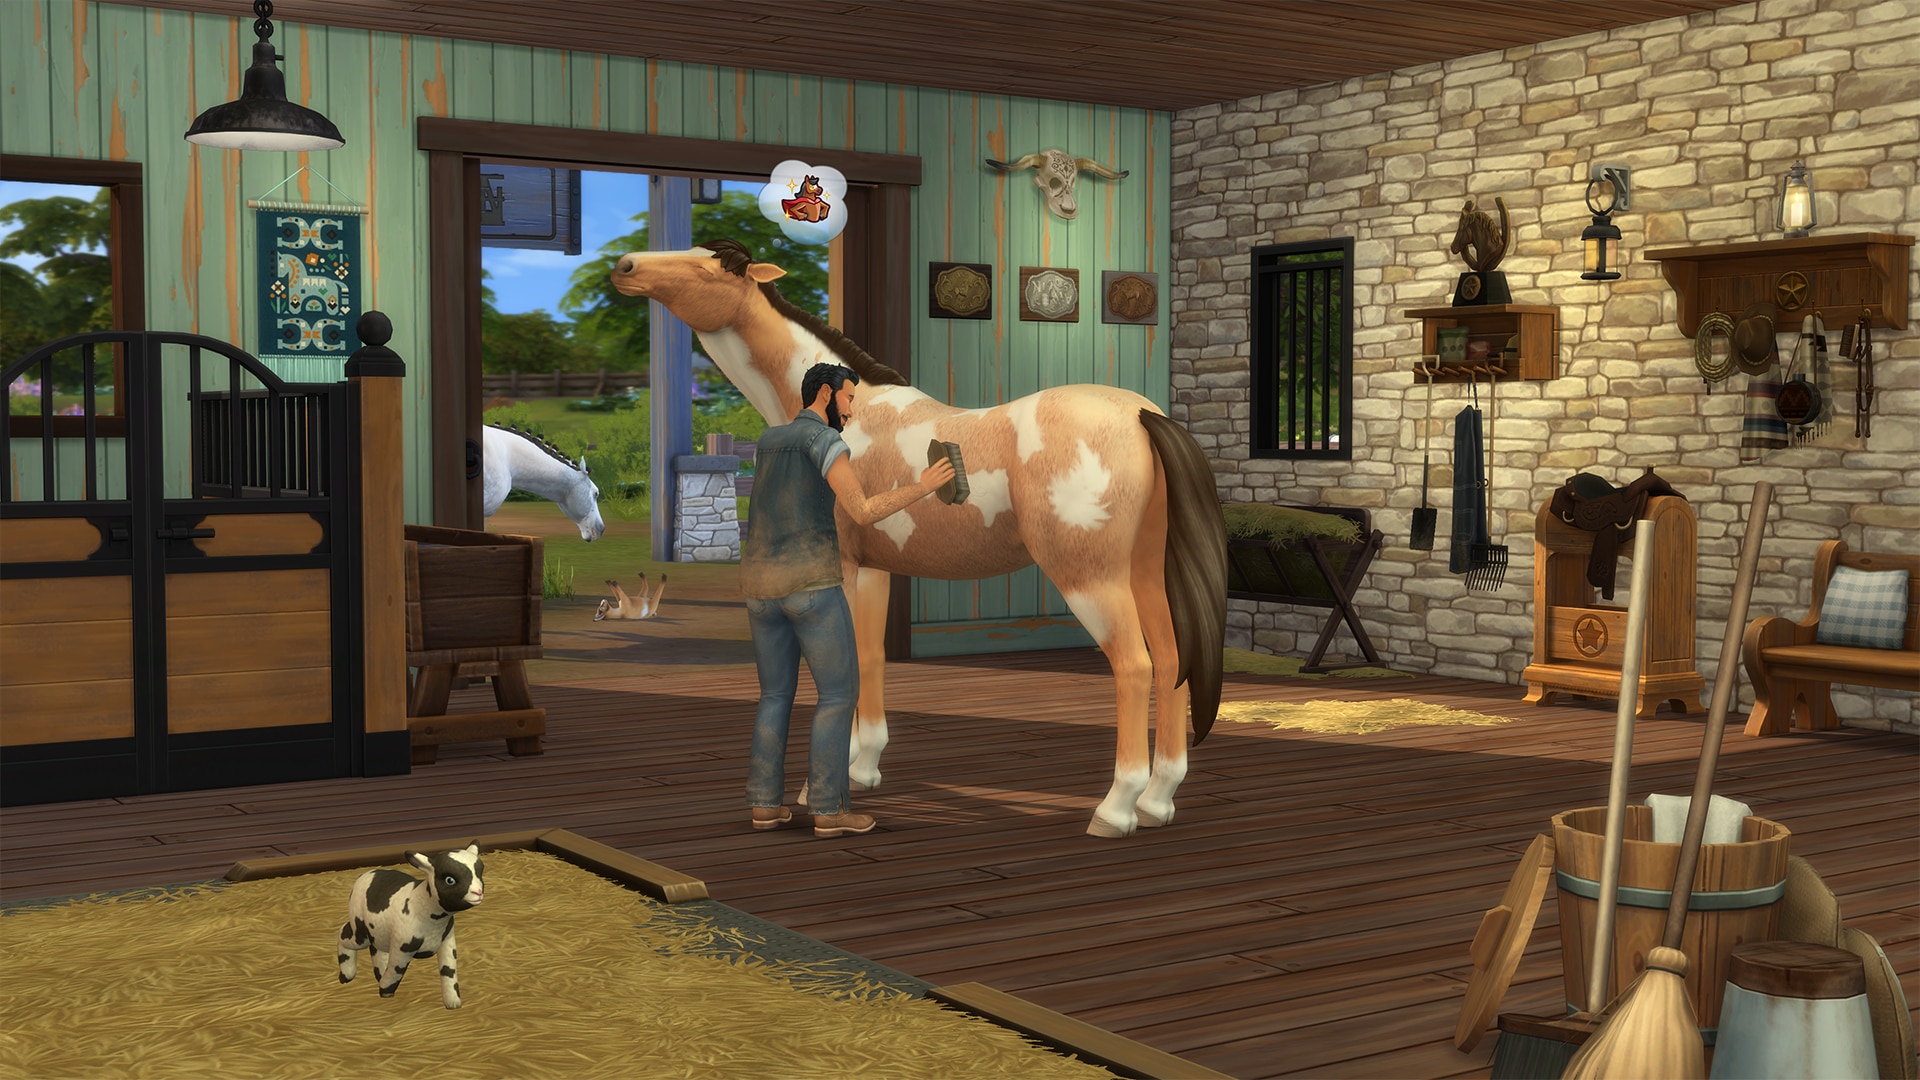 The Sims 4 finally adds horses with Horse Ranch Expansion Pack